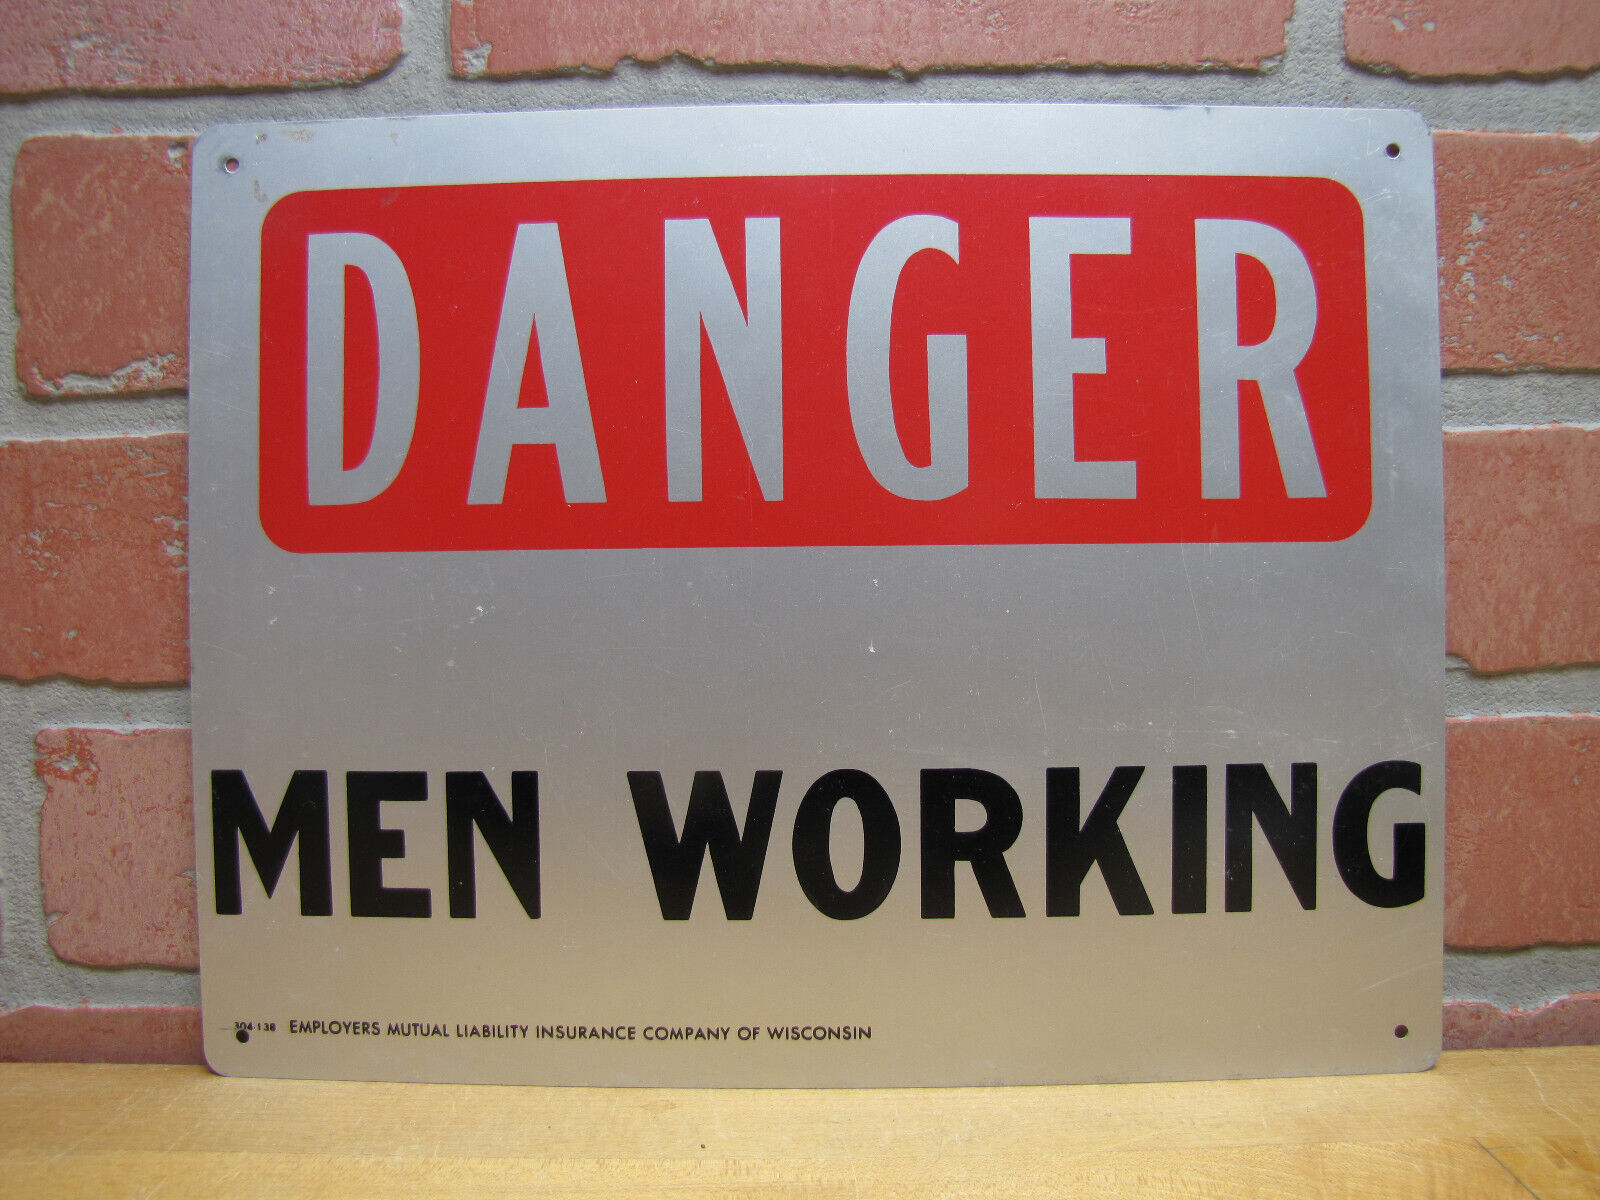 DANGER MEN WORKING OLD SIGN EMPLOYERS MUTUAL LIABILITY INSURANCE CO OF WISCONSIN